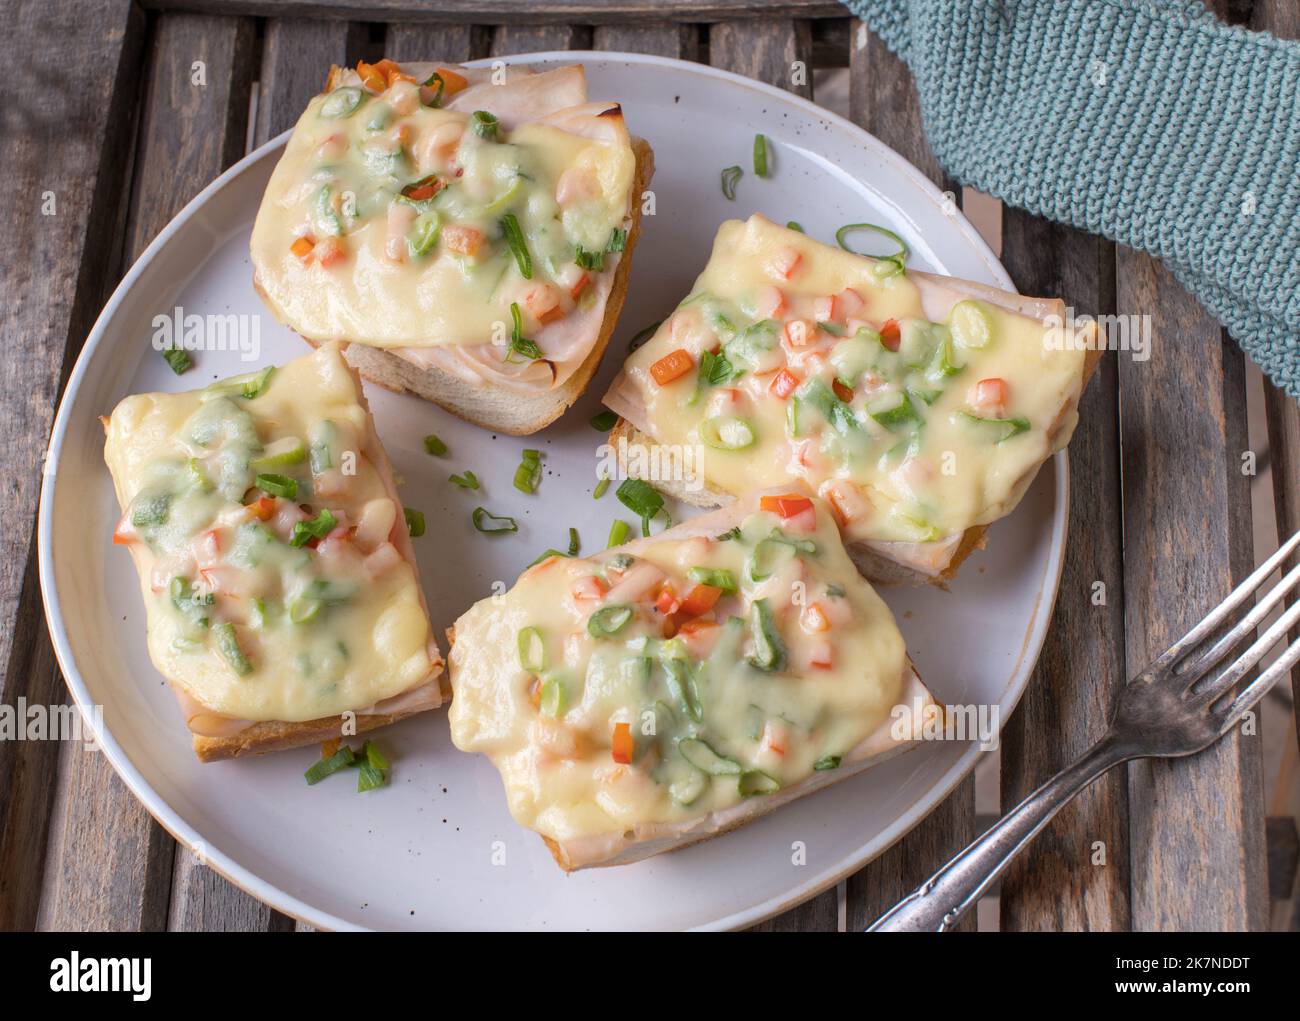 Open faced grilled ham and cheese sandwich with bell peppers and chives on french baguette Stock Photo